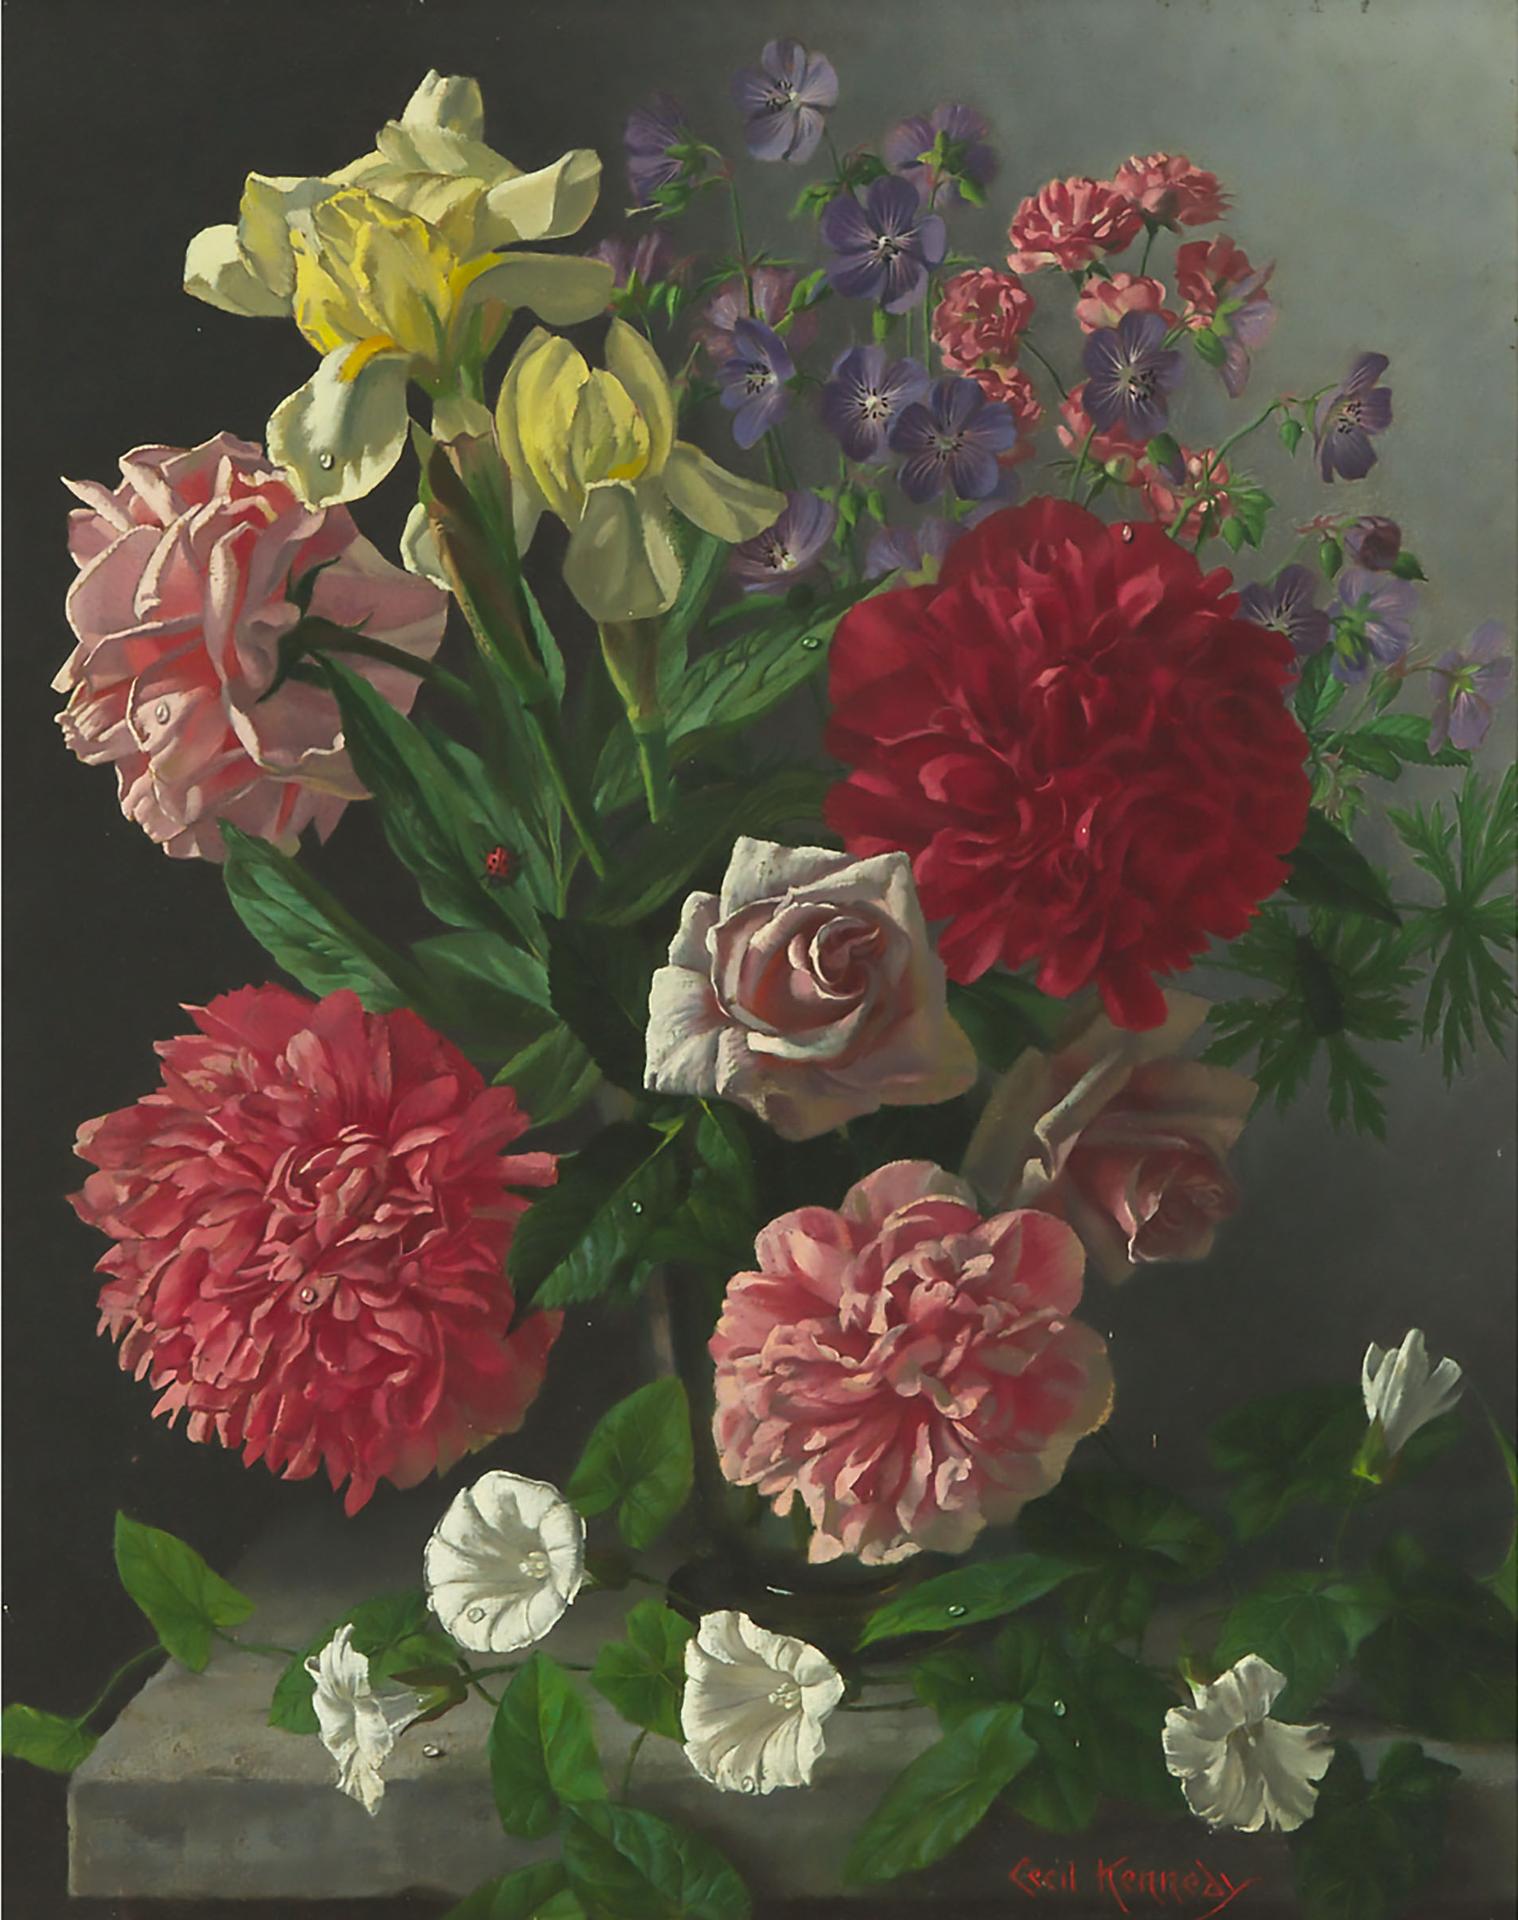 Cecil Kennedy (1905) - Vase Of Morning Glories, Roses, Daffodils, Peonies, Geraniums And Violas With Dew Droplets And A Ladybug